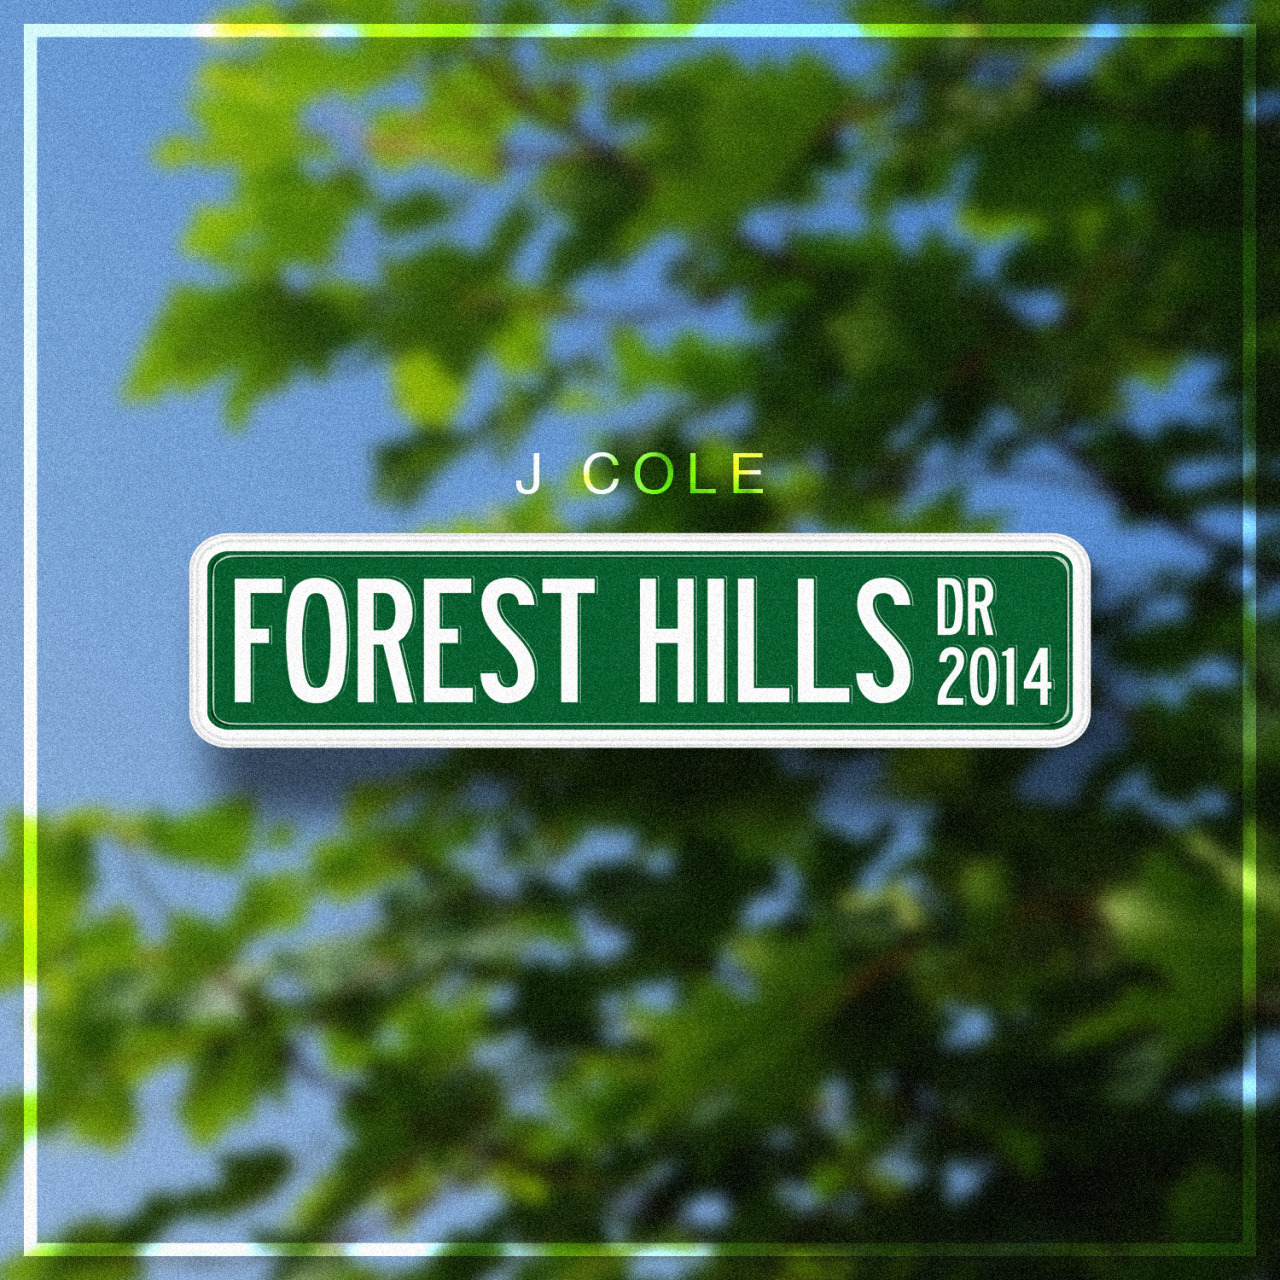 J cole 2014 forest hills drive documentary